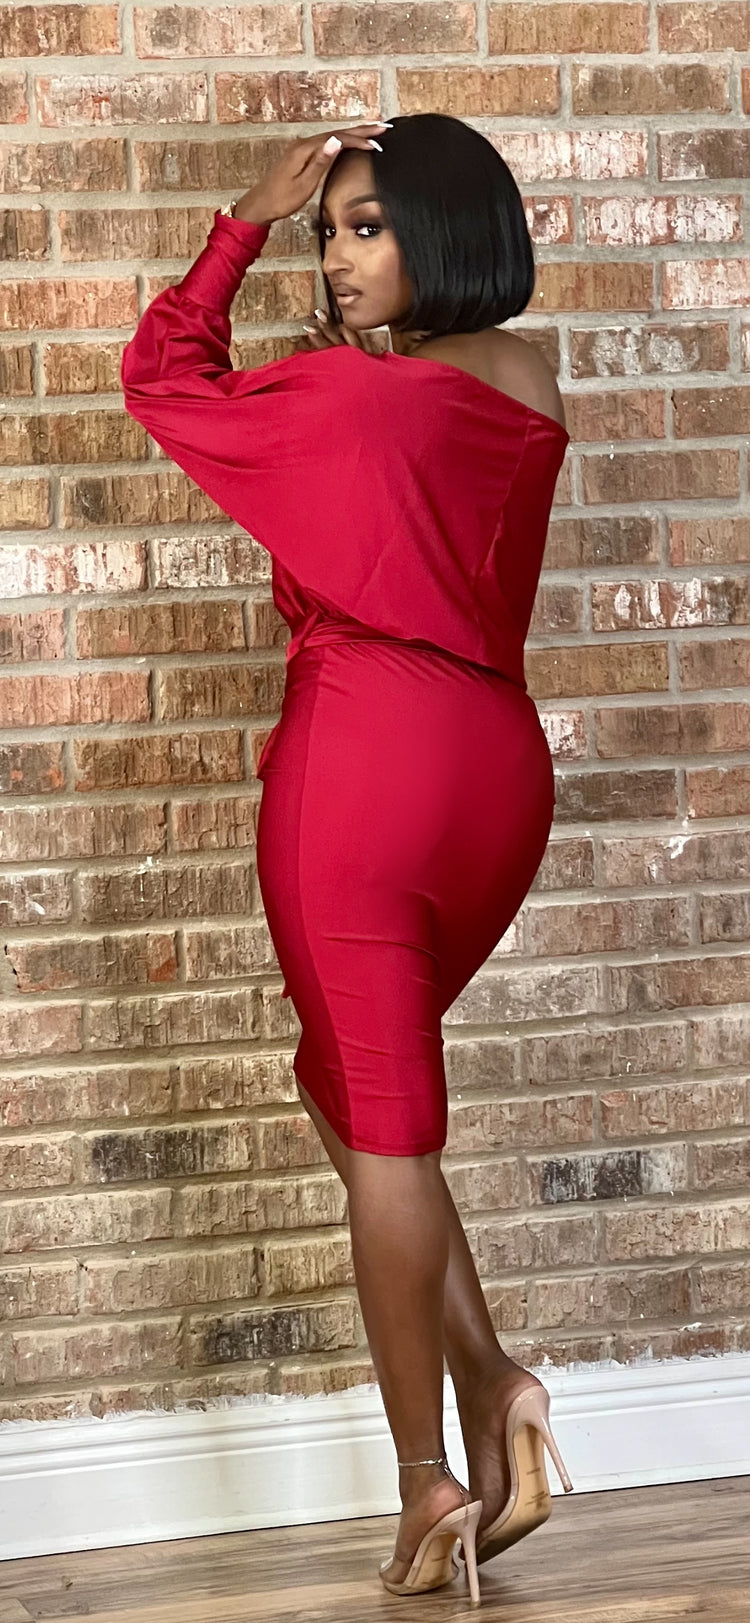 Get To It Berry Red Dress (5 colors)